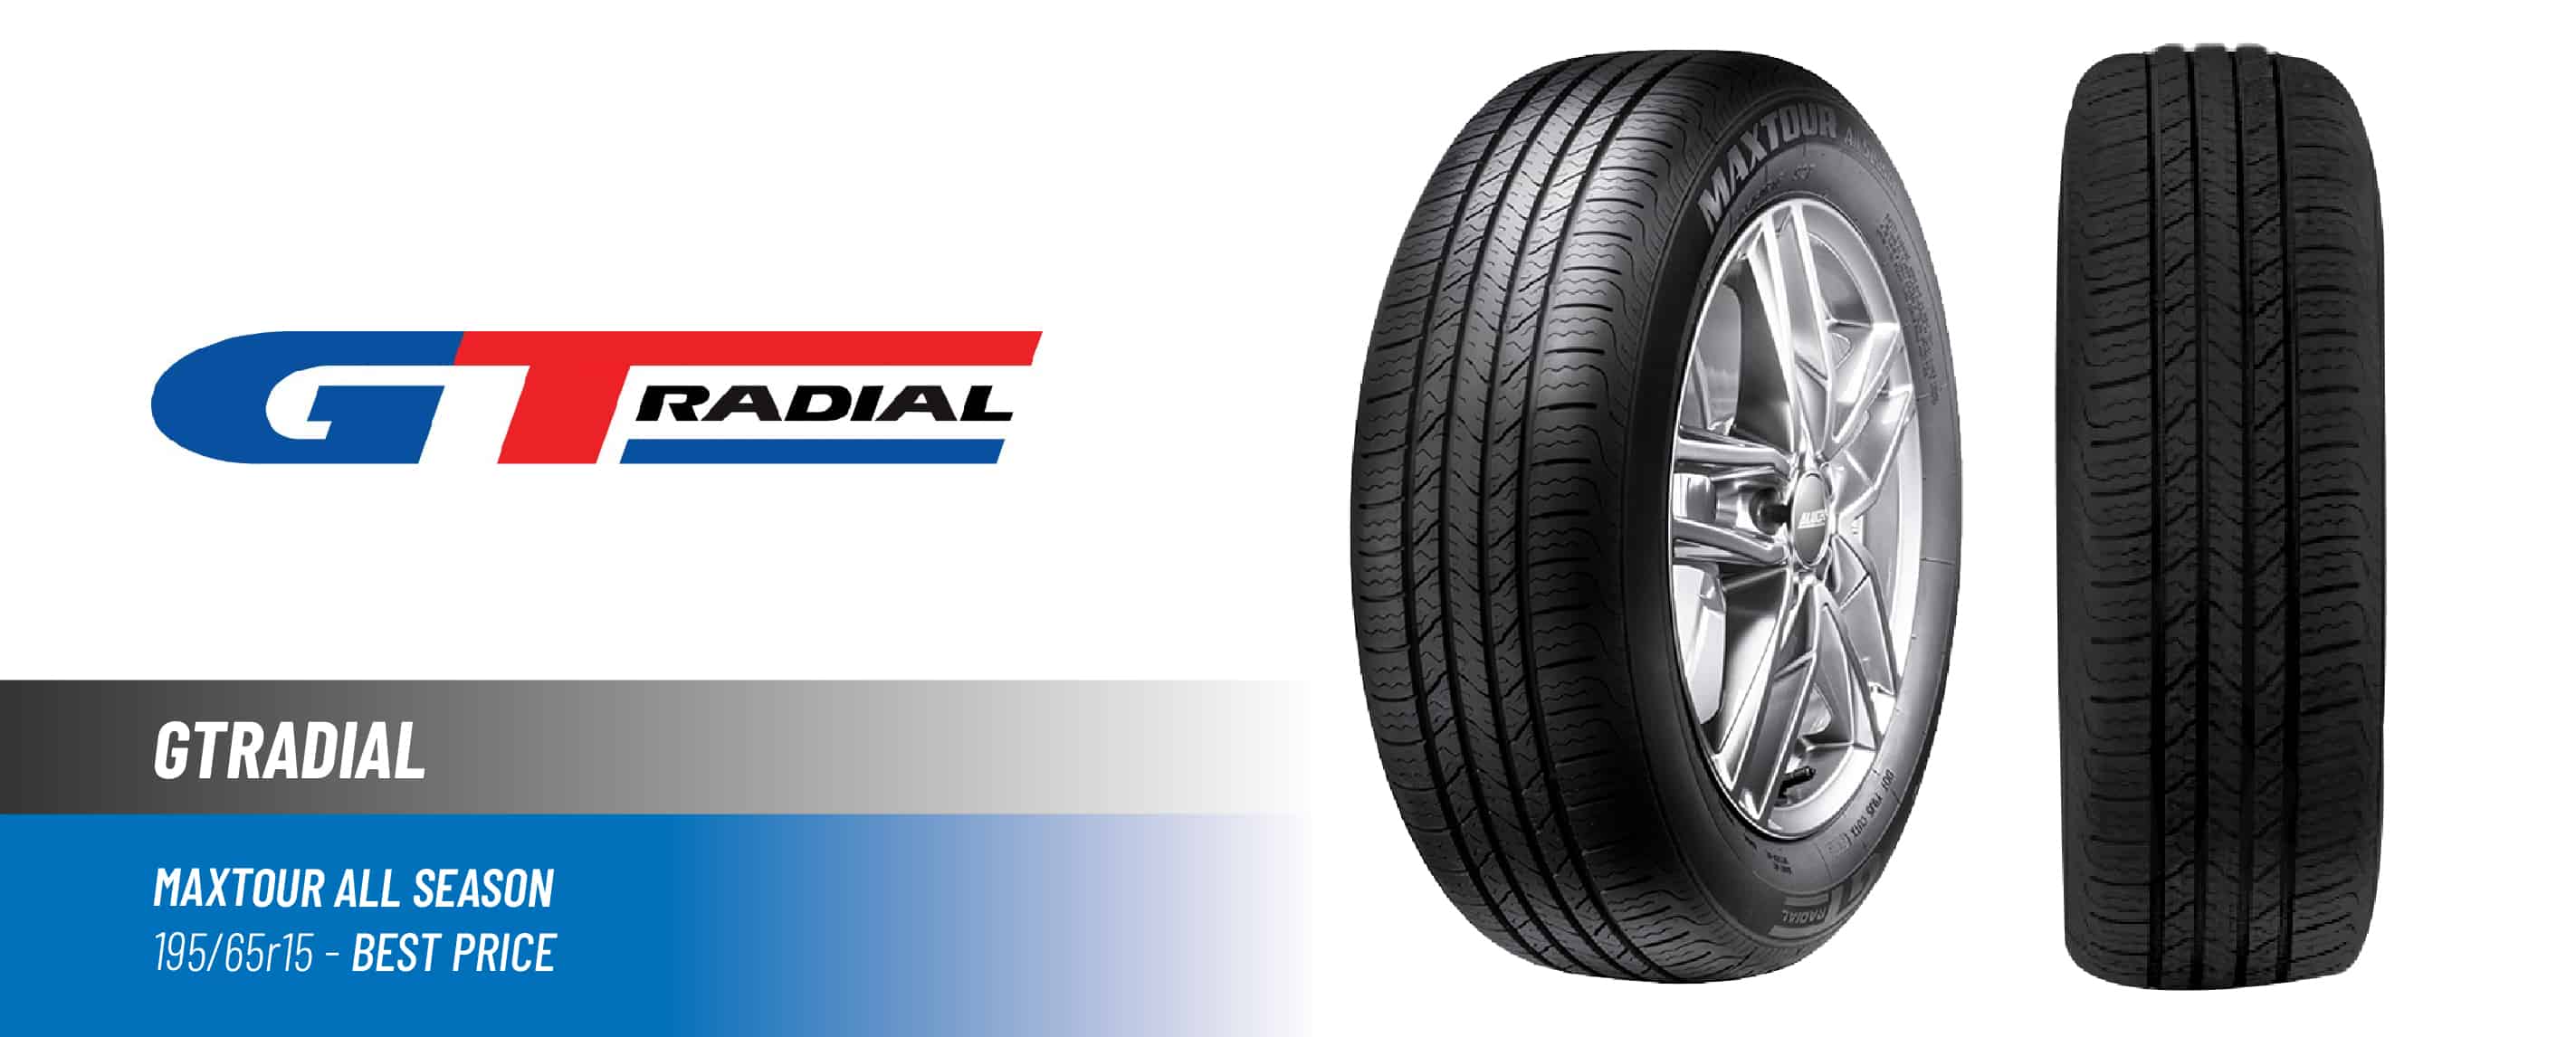 Top#1 Best Price: GTRadial Maxtour All Season – 195/65 R15